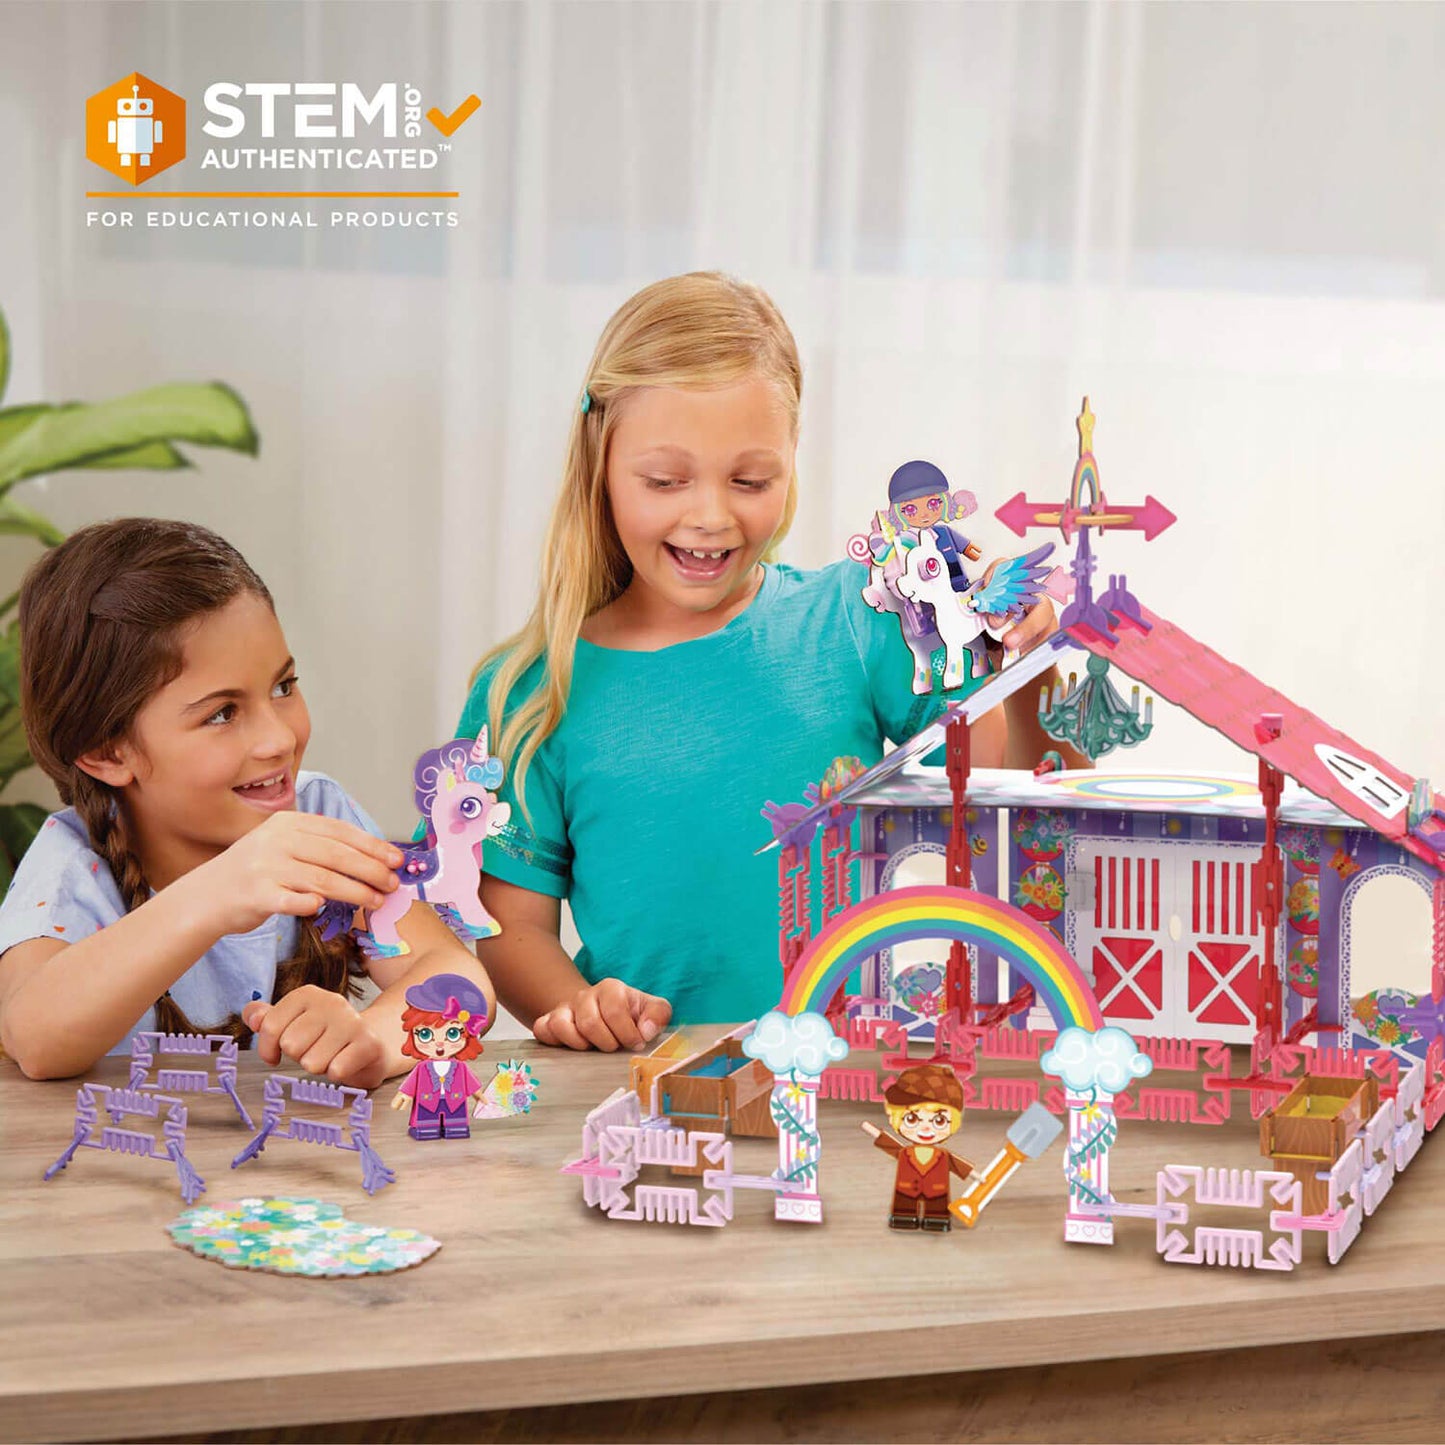 Pinxies Unicorn Barn is a STEM authenticated building set for ages 6+